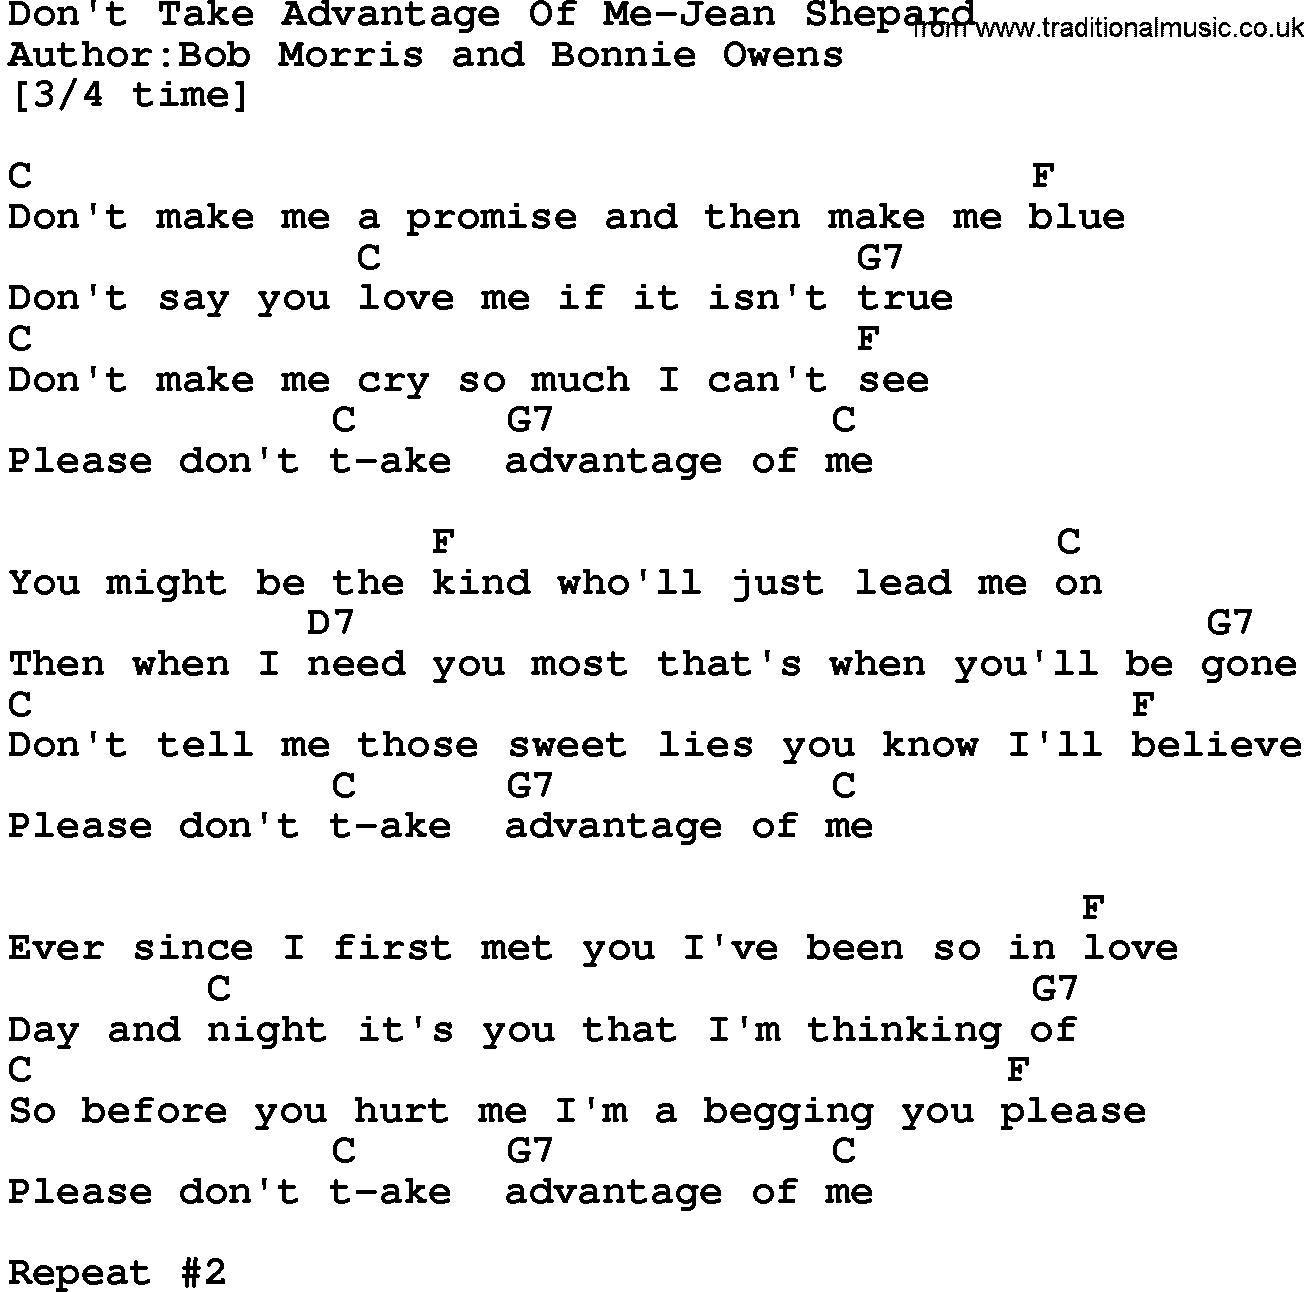 Country music song: Don't Take Advantage Of Me-Jean Shepard lyrics and chords